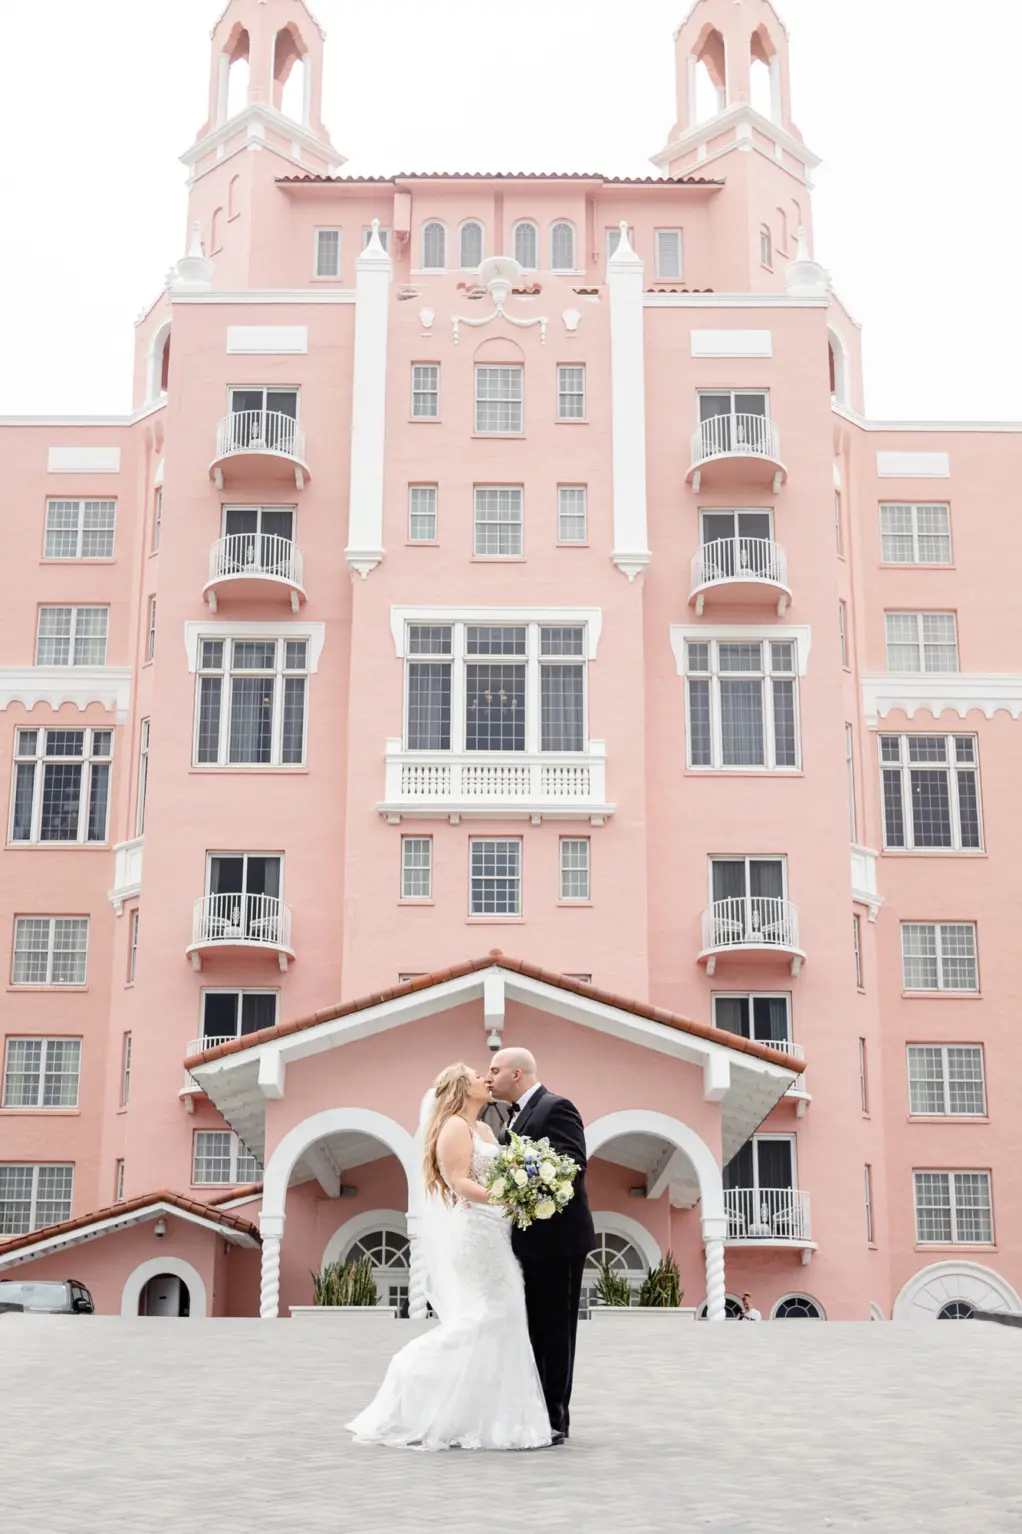 Bride and Groom Kissing in Front of The Pink Palace | Saint Petersburg Wedding Venue The Don CeSar